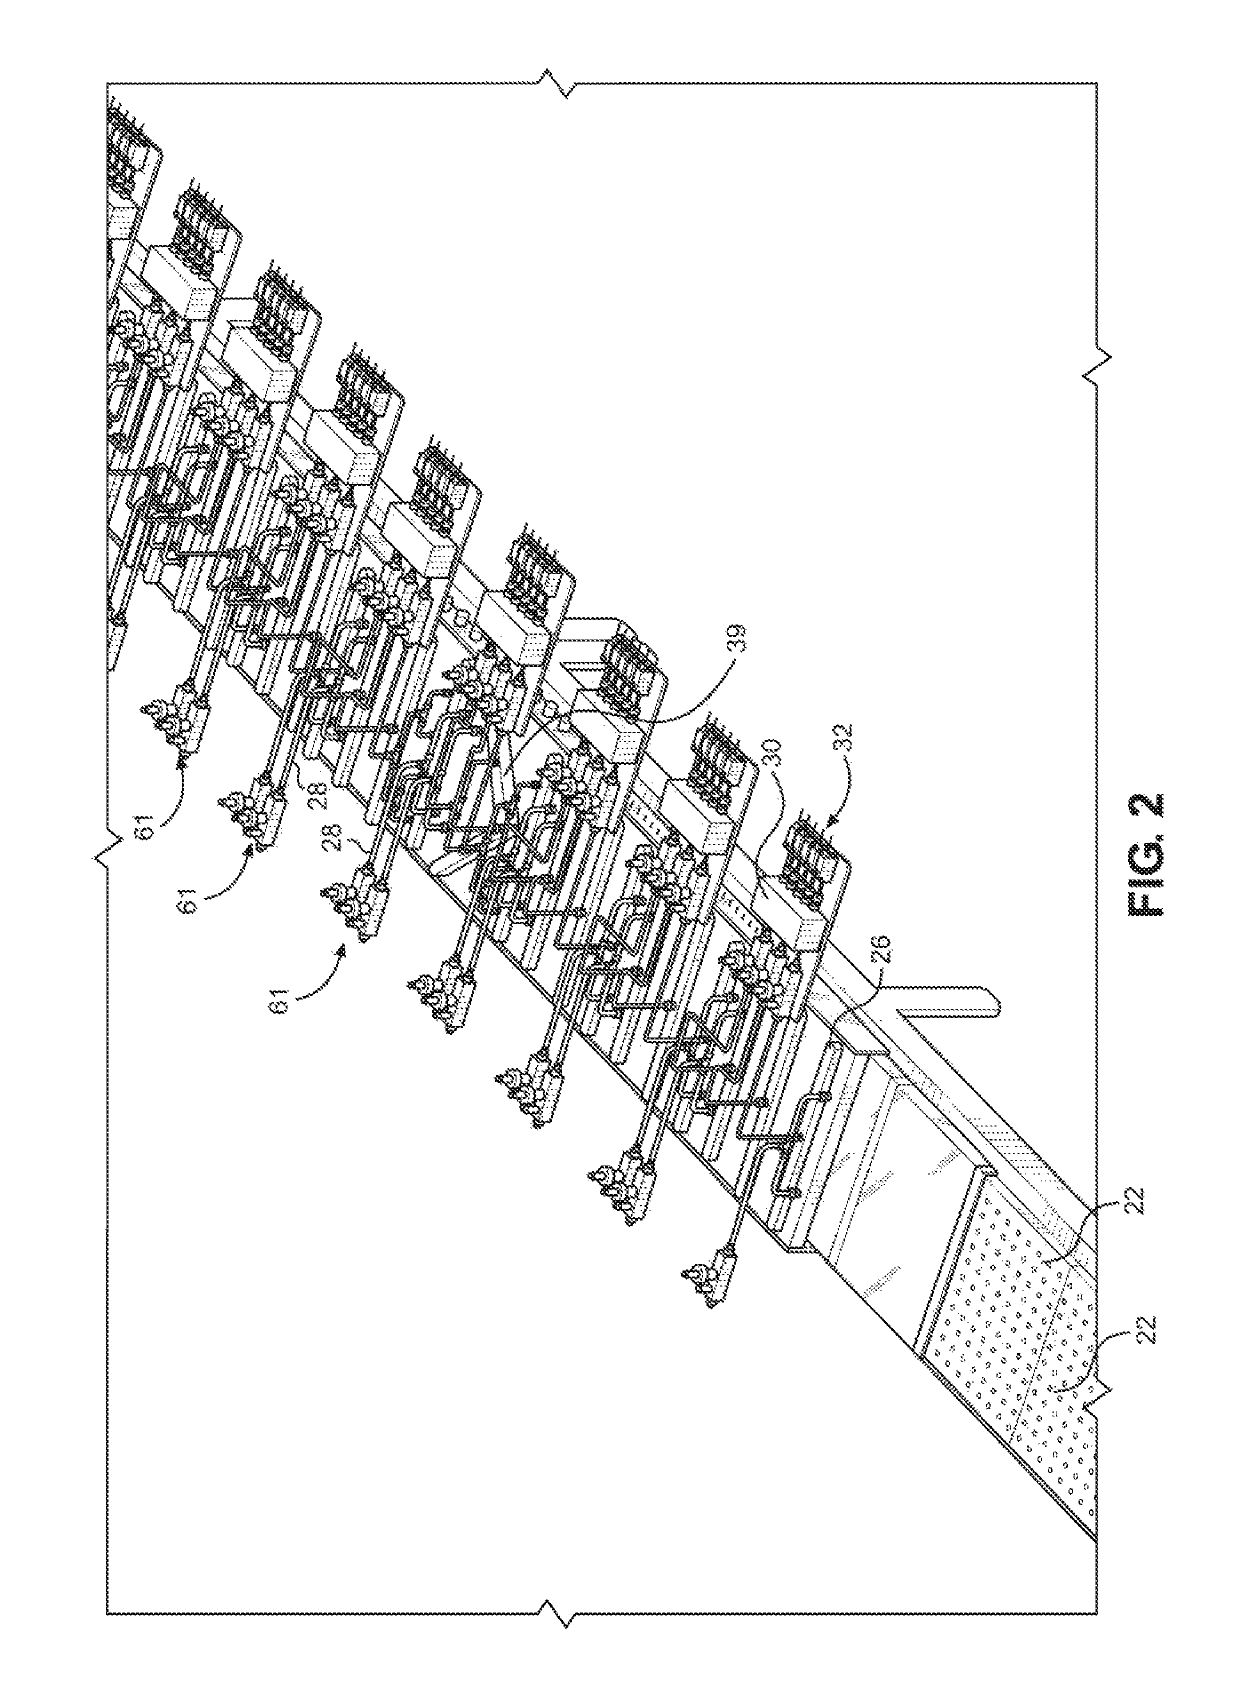 Apparatus for producing graphene and other 2D materials